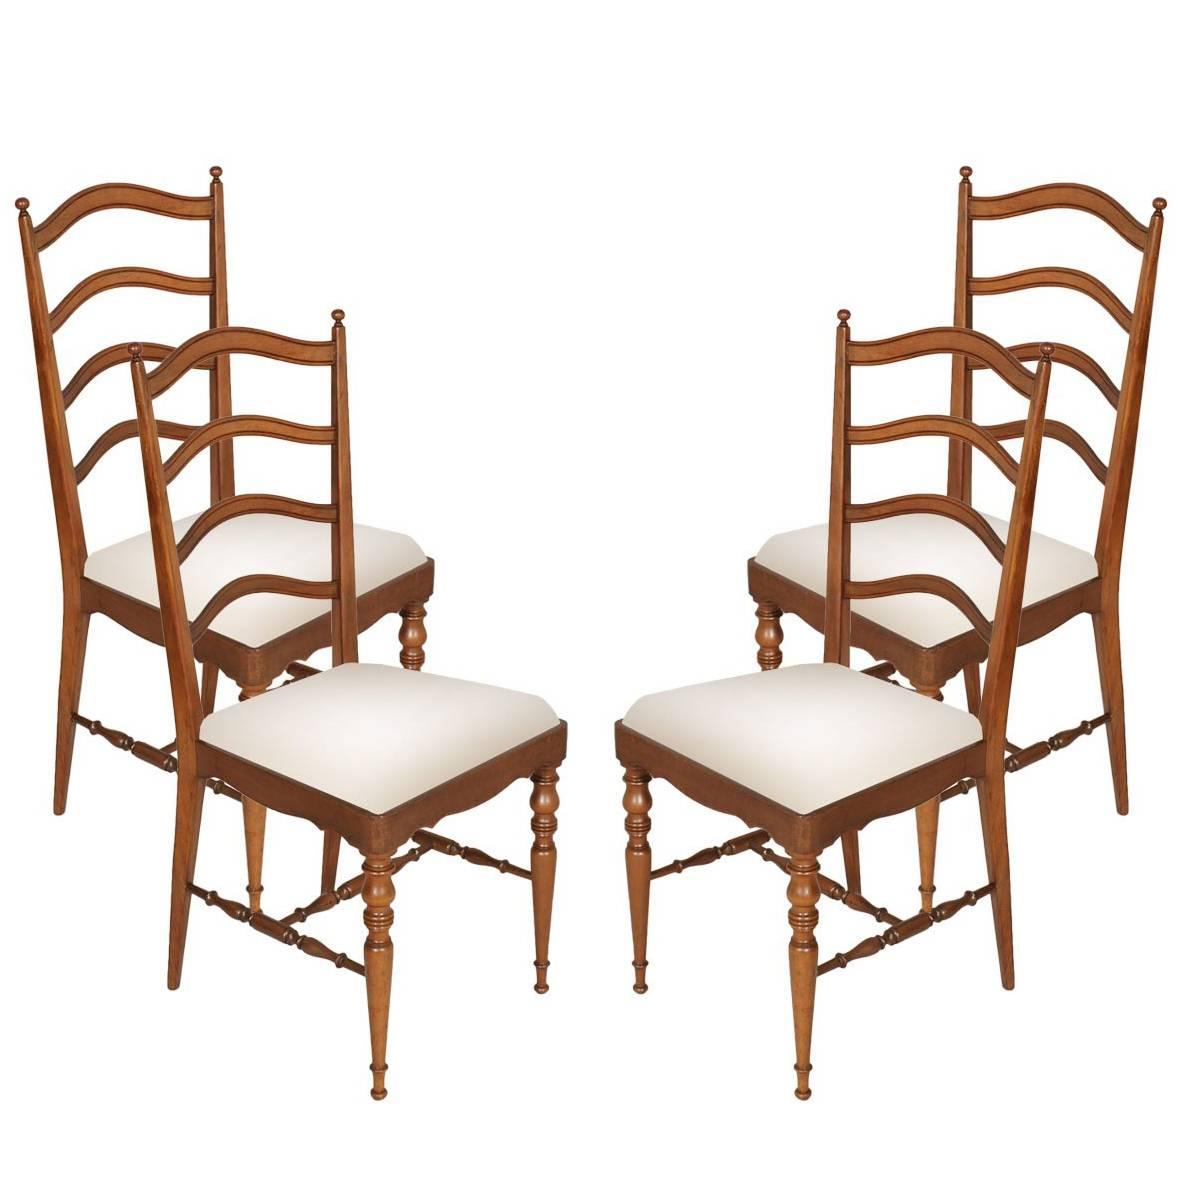 Four Mid-Century Modern Dining Chiavari Chairs, Blond Walnut with New Upholstery For Sale